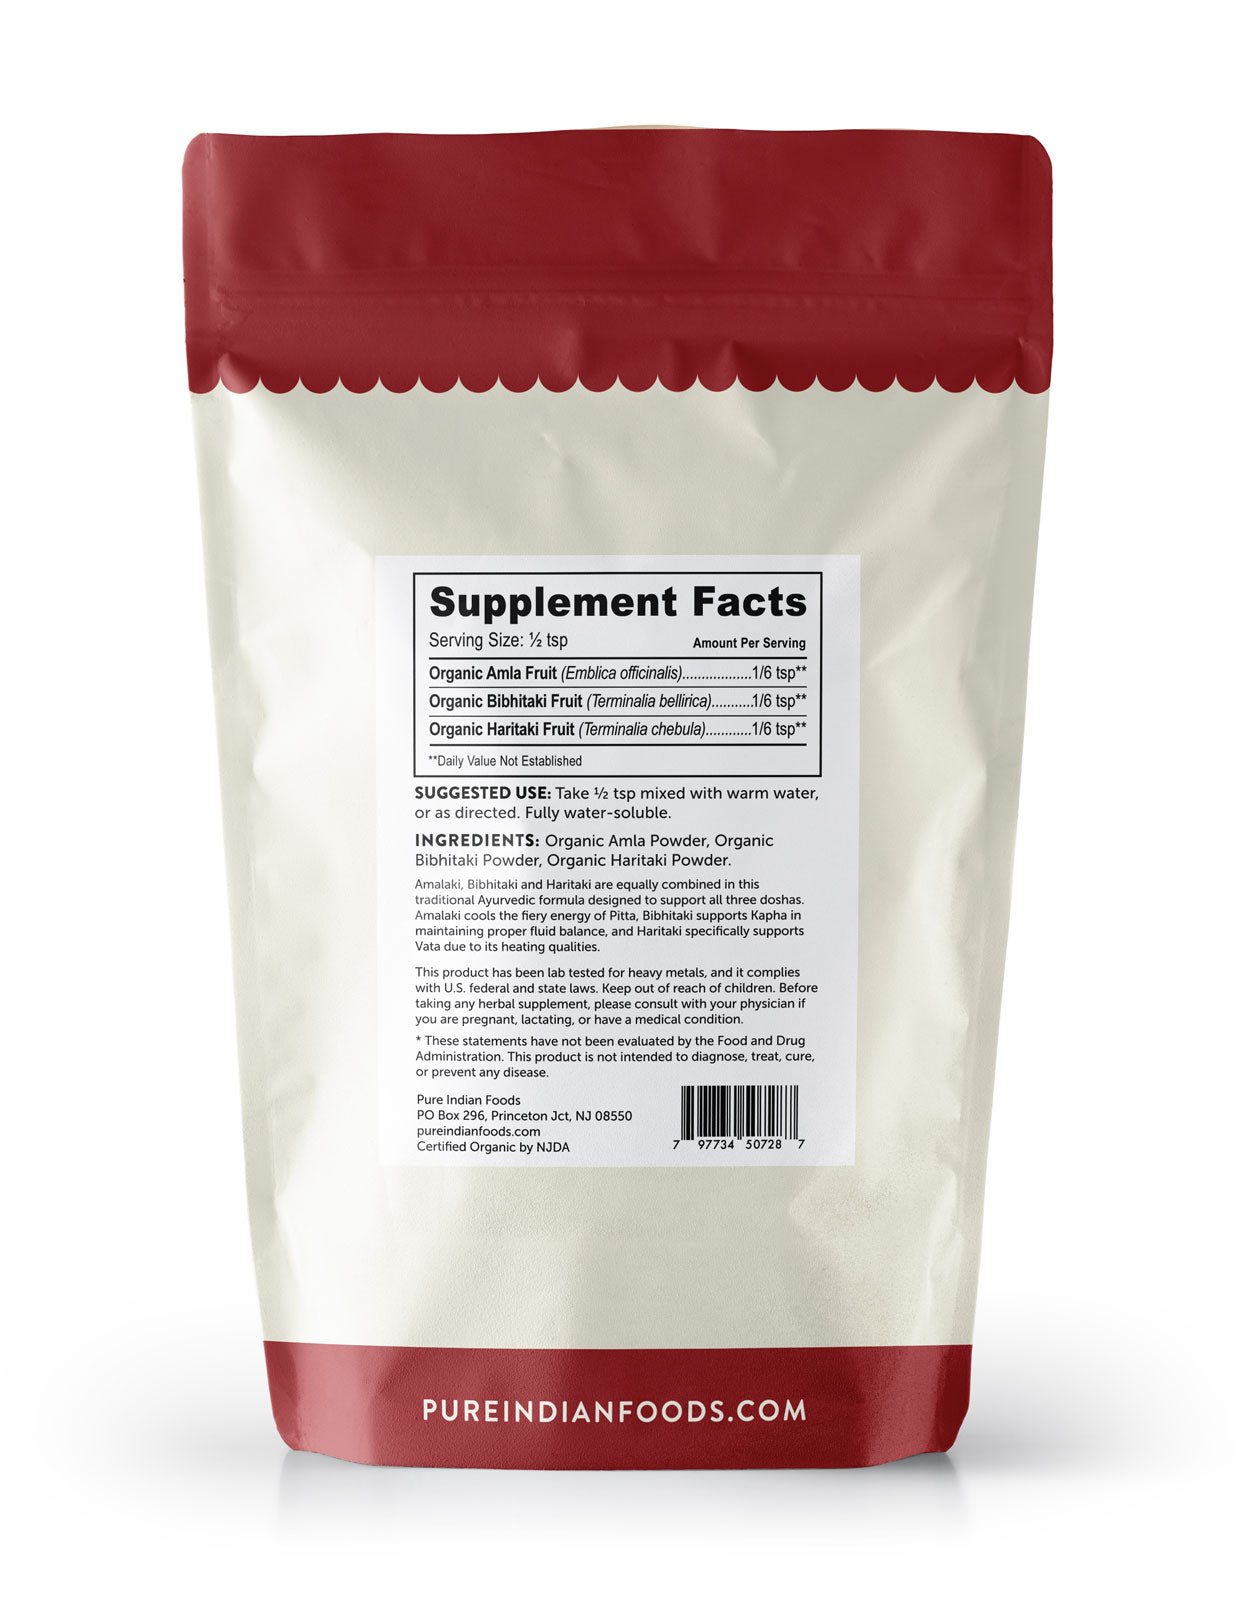 Supplement Facts label on a bag of Pure Indian Foods Organic Triphala Powder